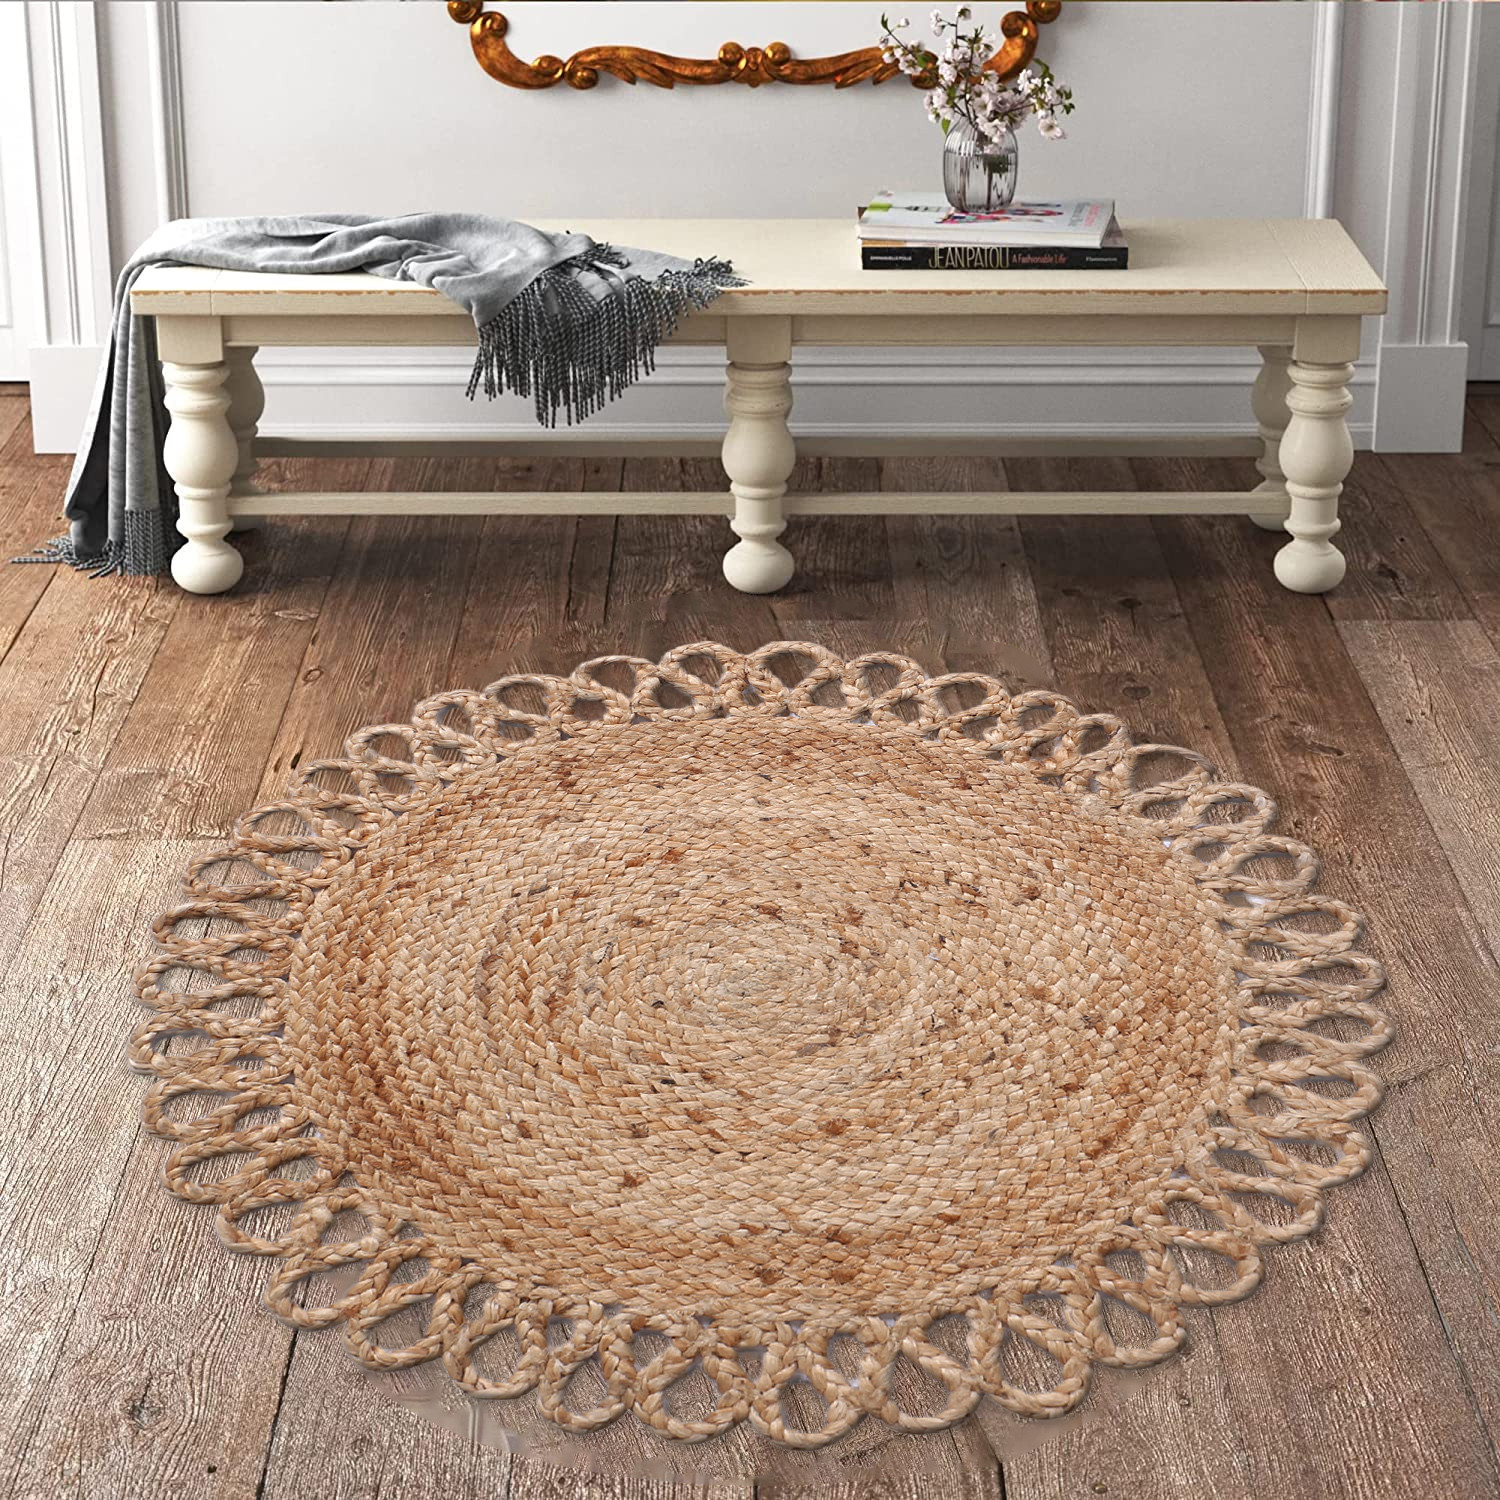 Kuber Industries Hand Woven Carpet Rugs|Natural Stitch Braided Jute Door mat|Round Shape Mat For Bedroom,Living Room,Dining Room,Yoga,60x60 cm,(Brown)